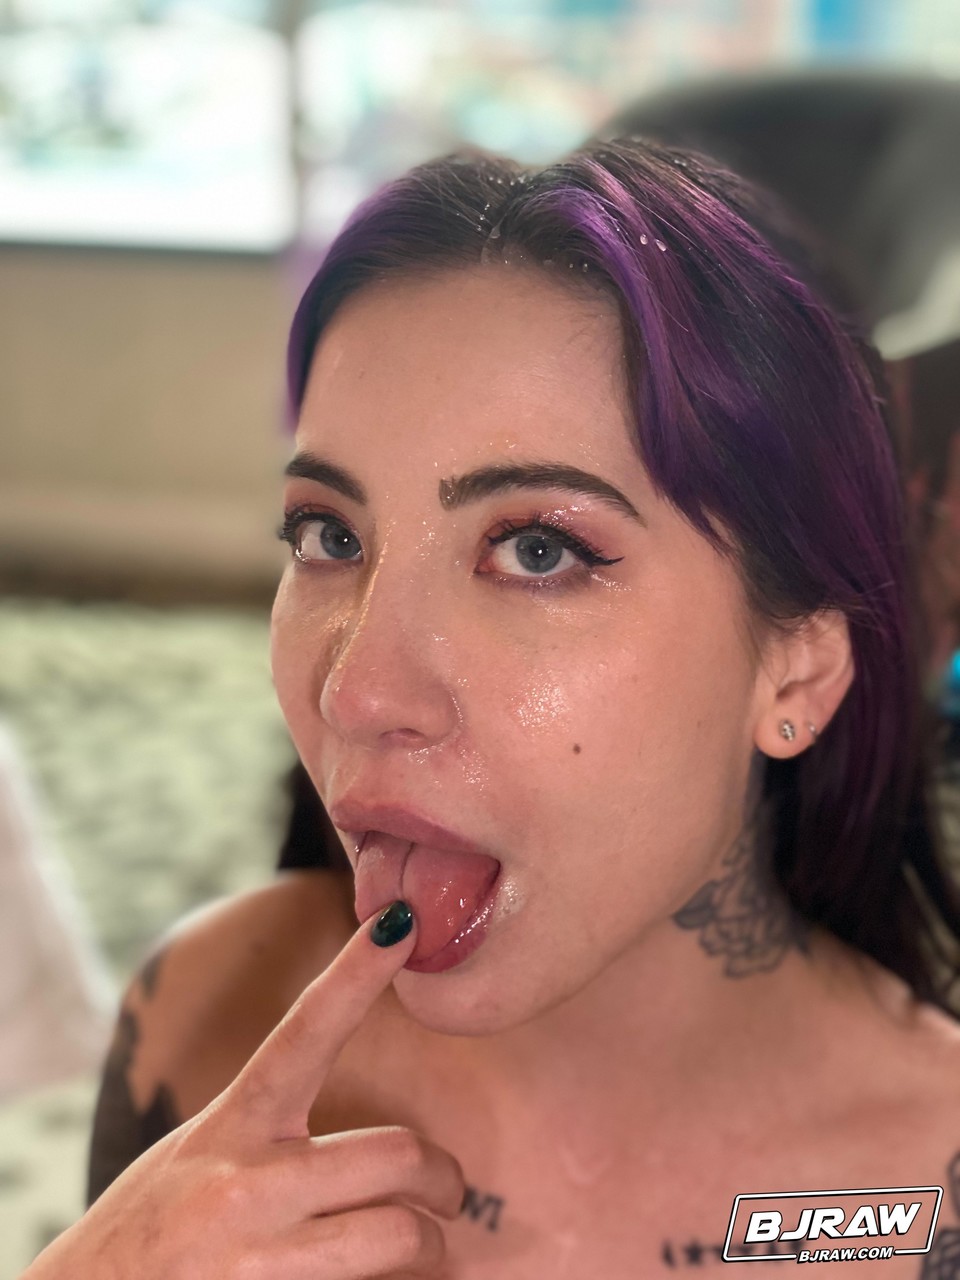 Brunette babe with tattoos Charlotte Sartre takes a dick in her mouth foto porno #424561435 | BJ Raw Pics, Charlotte Sartre, Tattoo, porno mobile